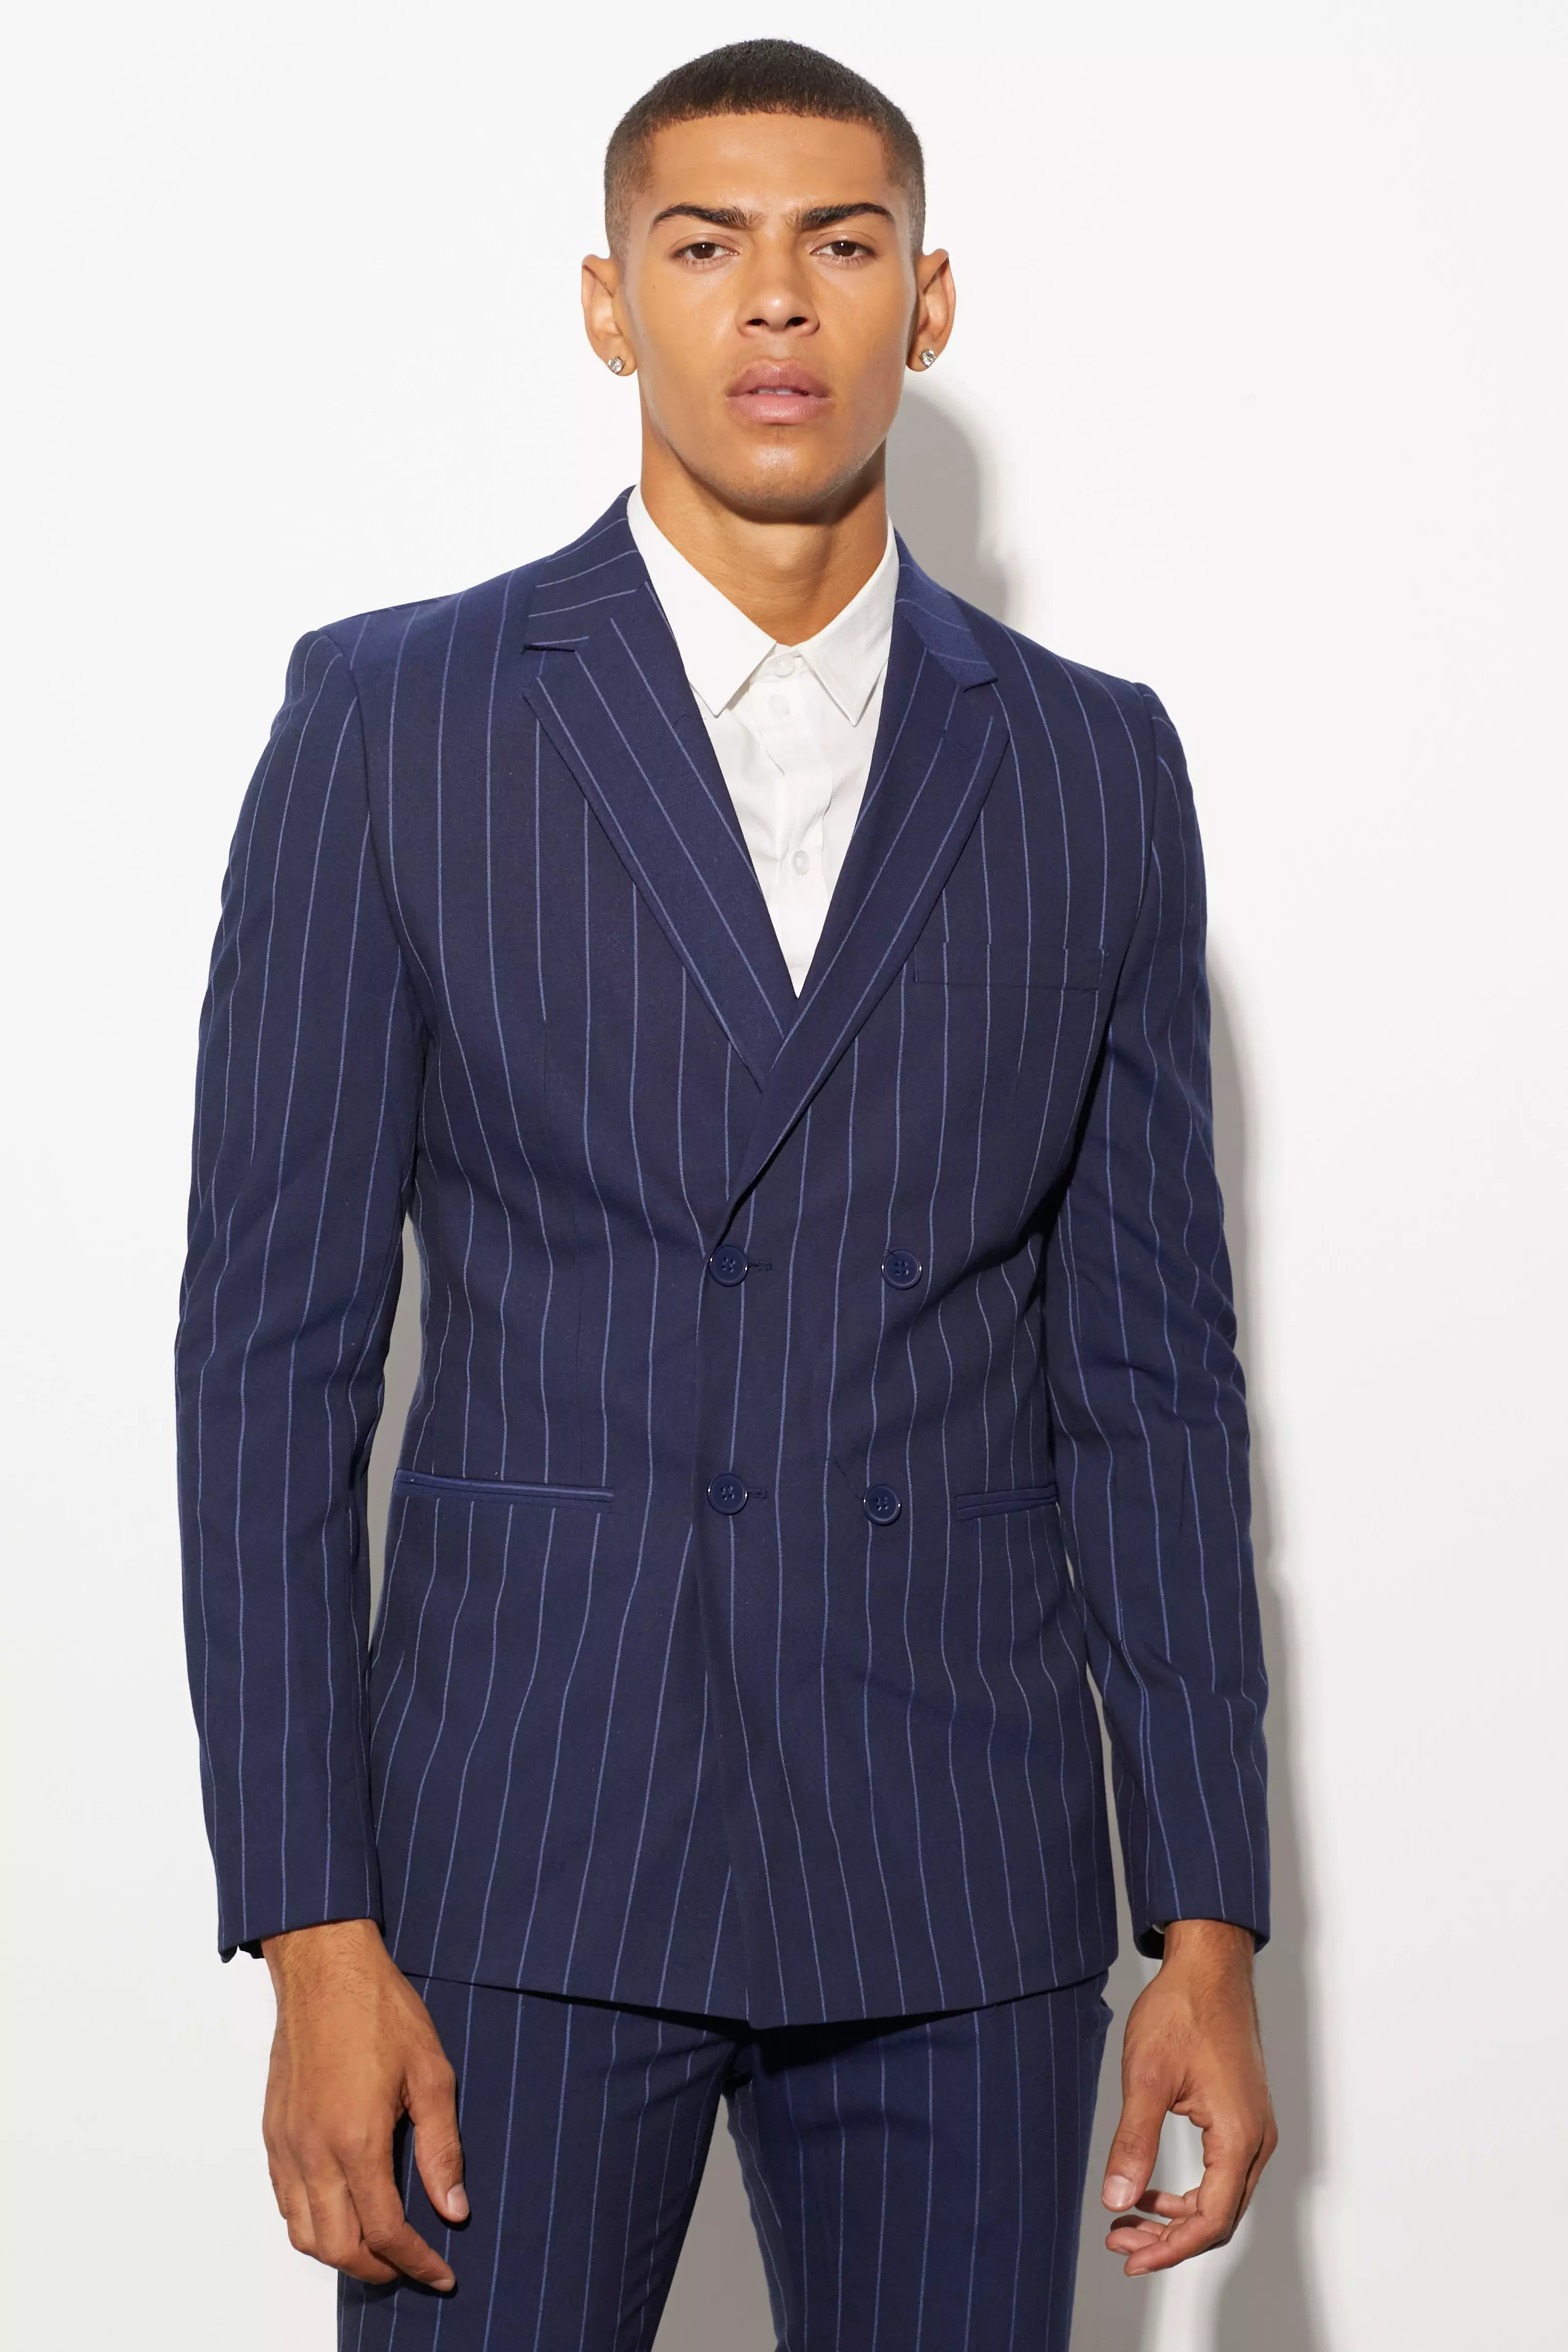 The return of the double-breasted jacket, Men's suits